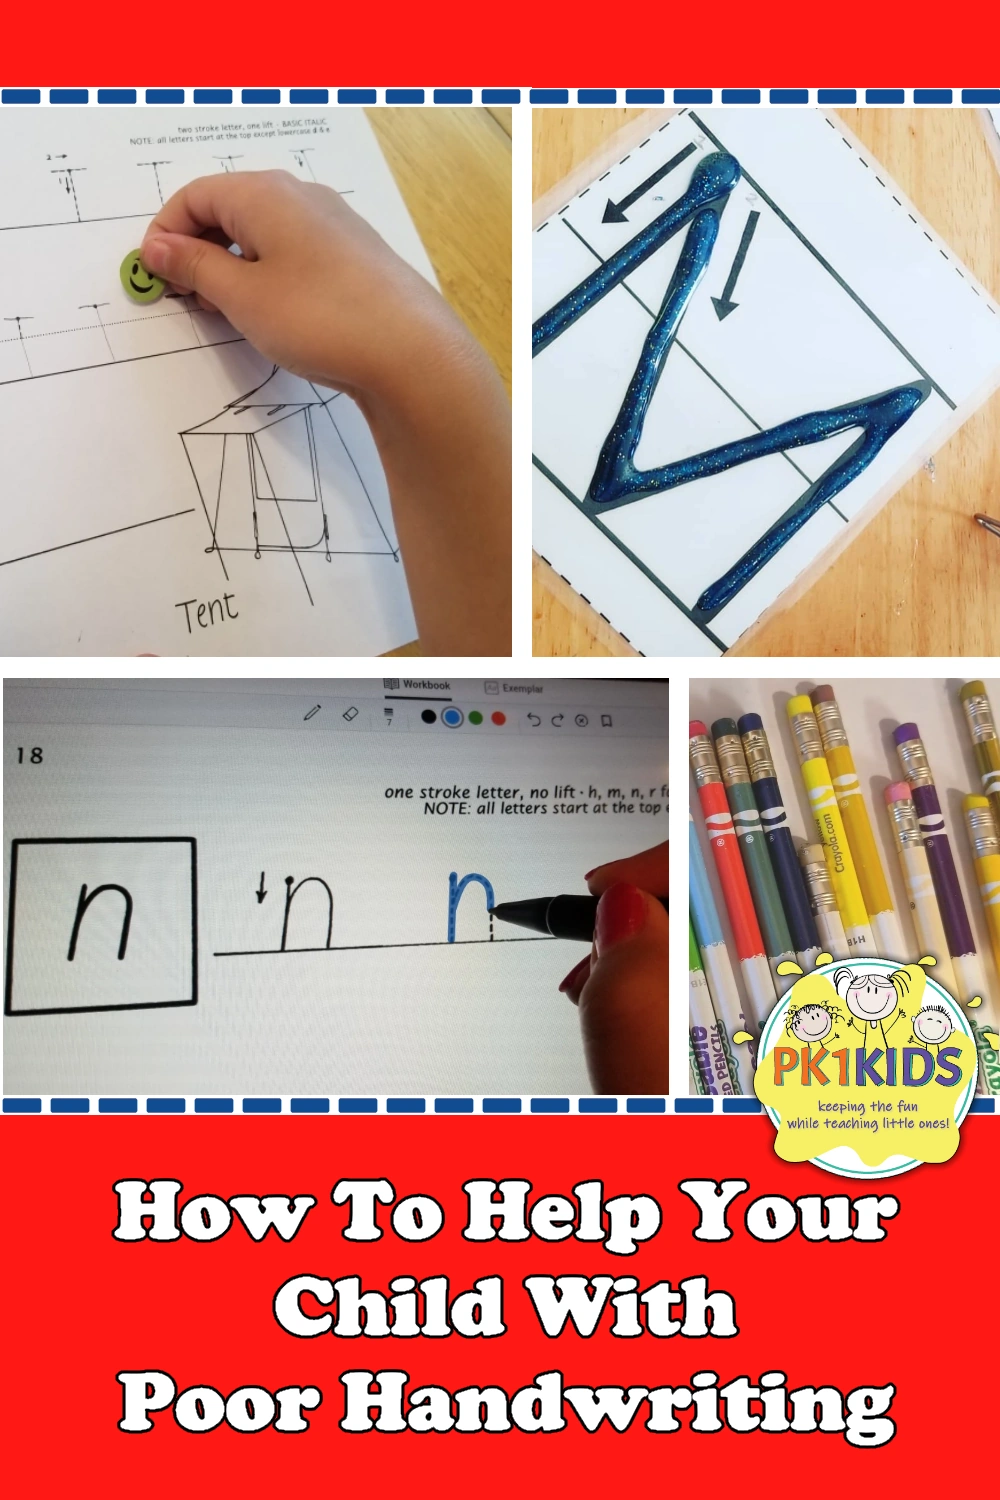 Tips for helping your kids with poor handwriting